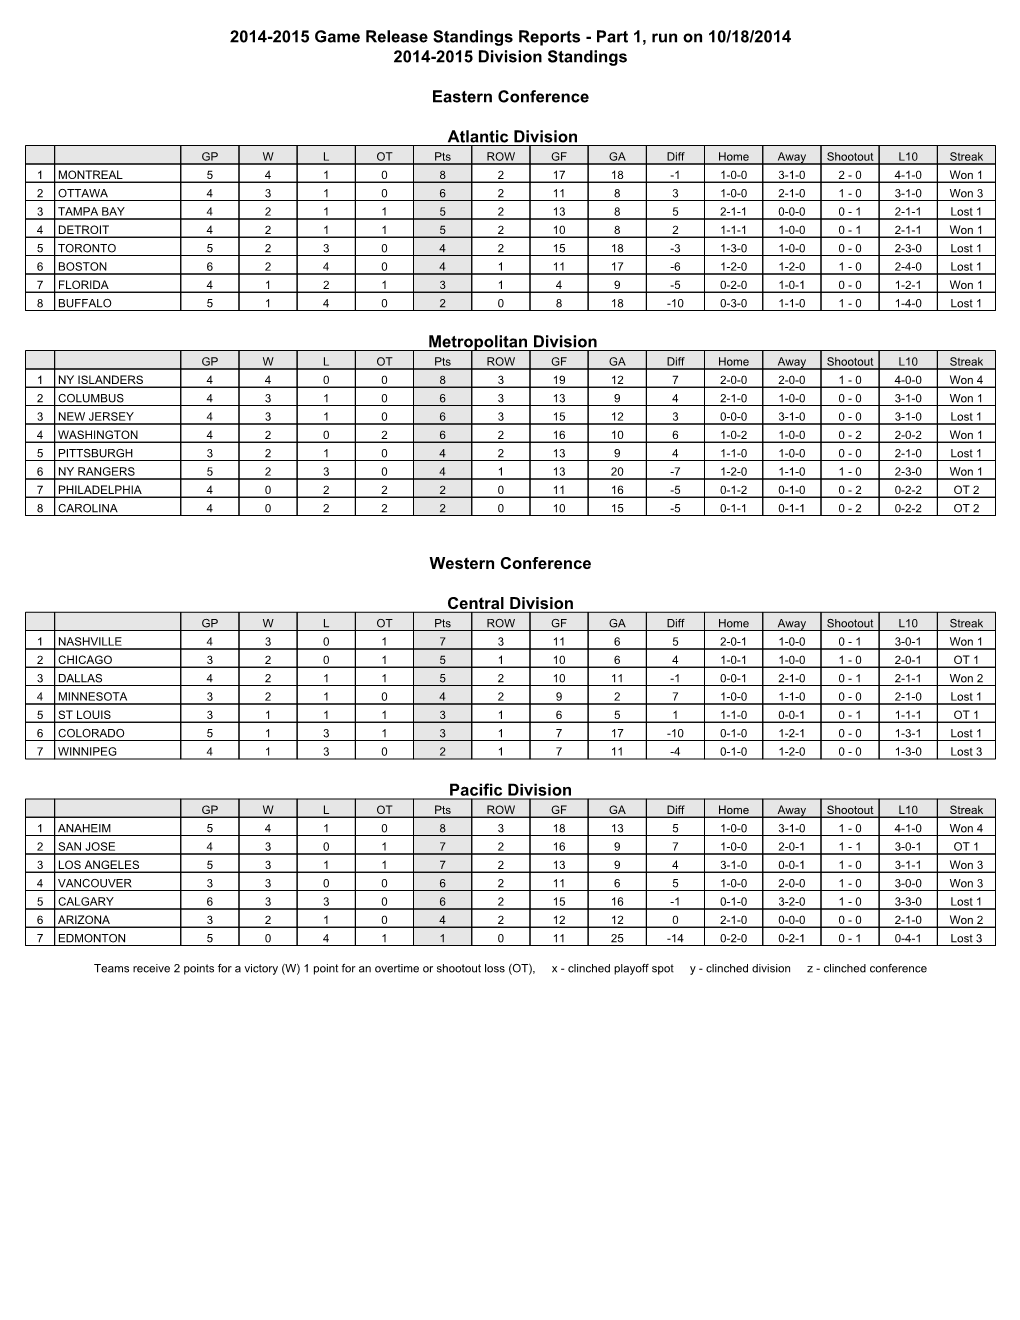 2014-2015 Game Release Standings Reports - Part 1, Run on 10/18/2014 2014-2015 Division Standings